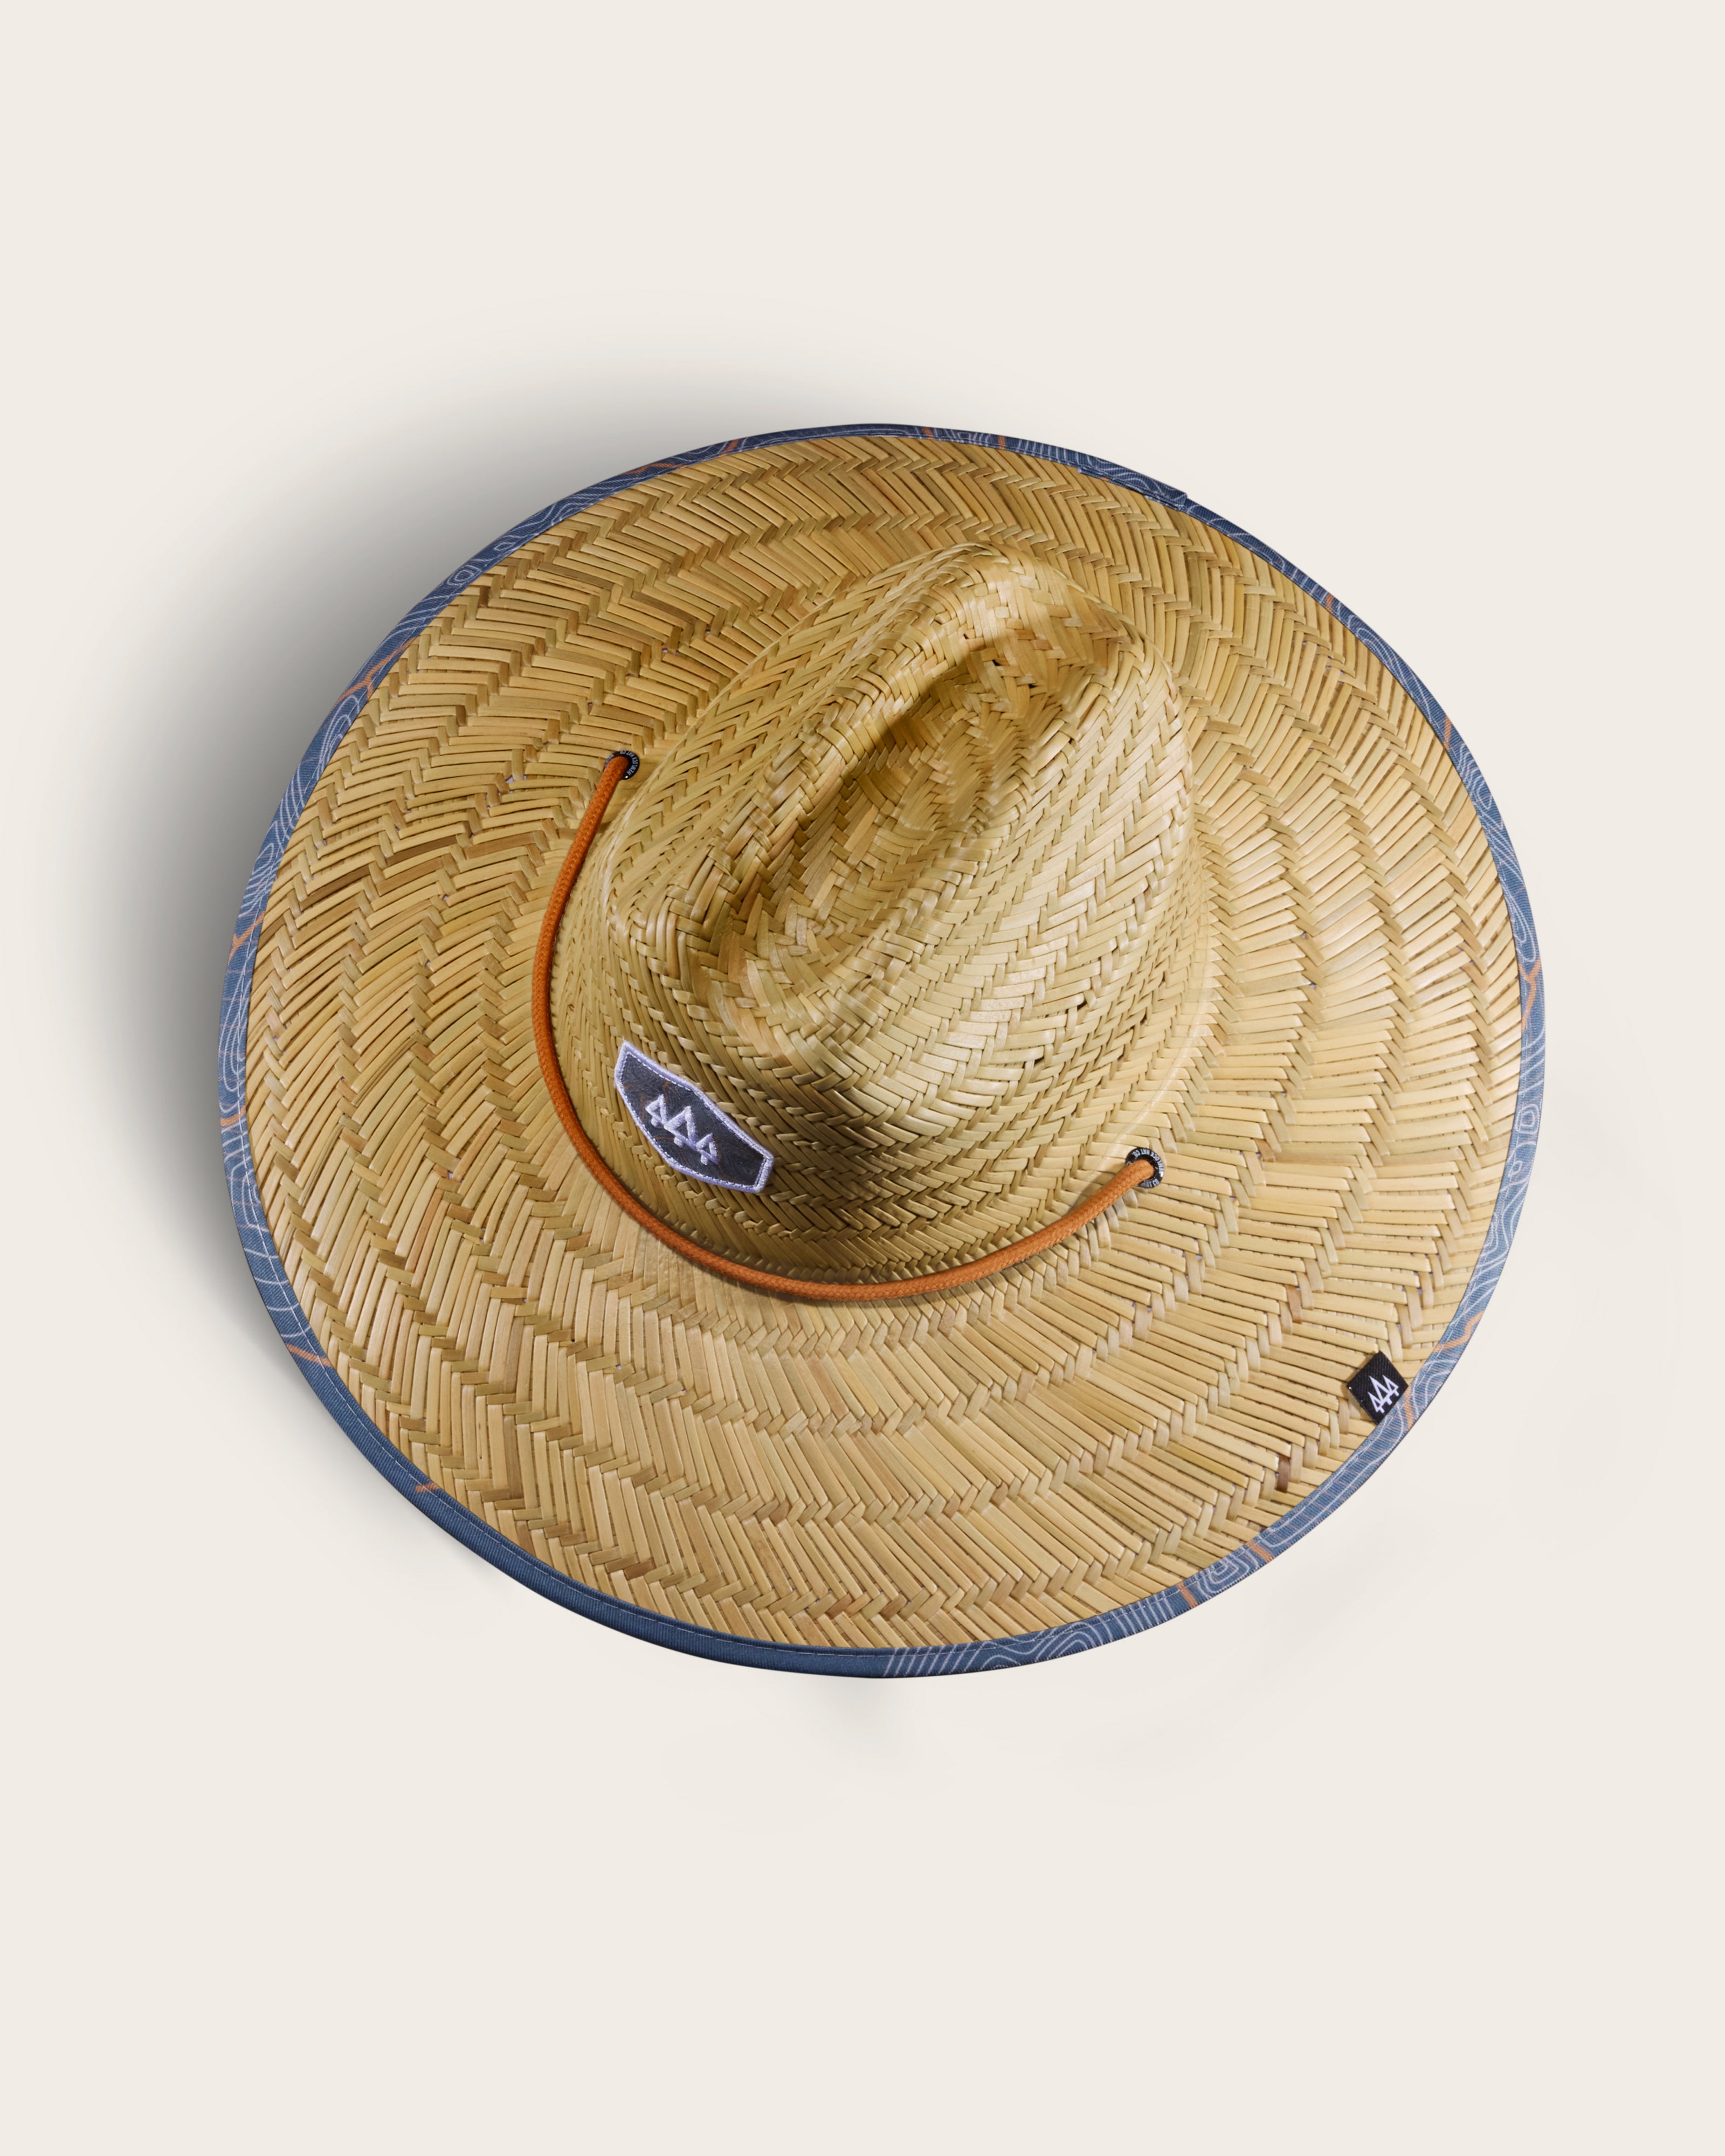 Hemlock Nomad straw lifeguard hat with topography pattern top of hat